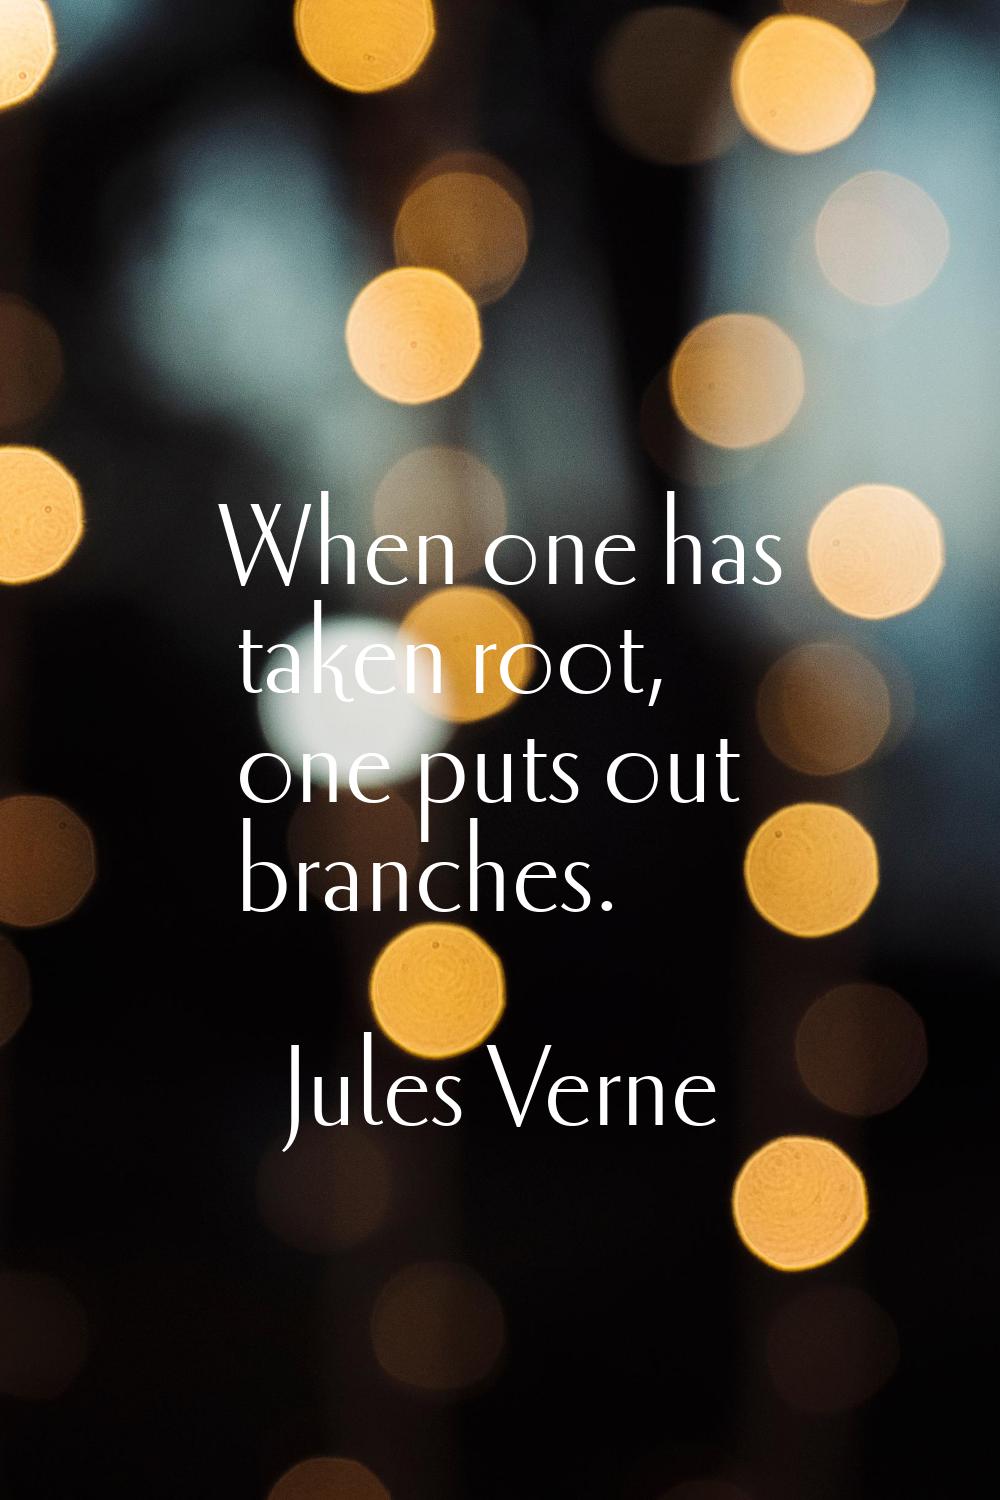 When one has taken root, one puts out branches.